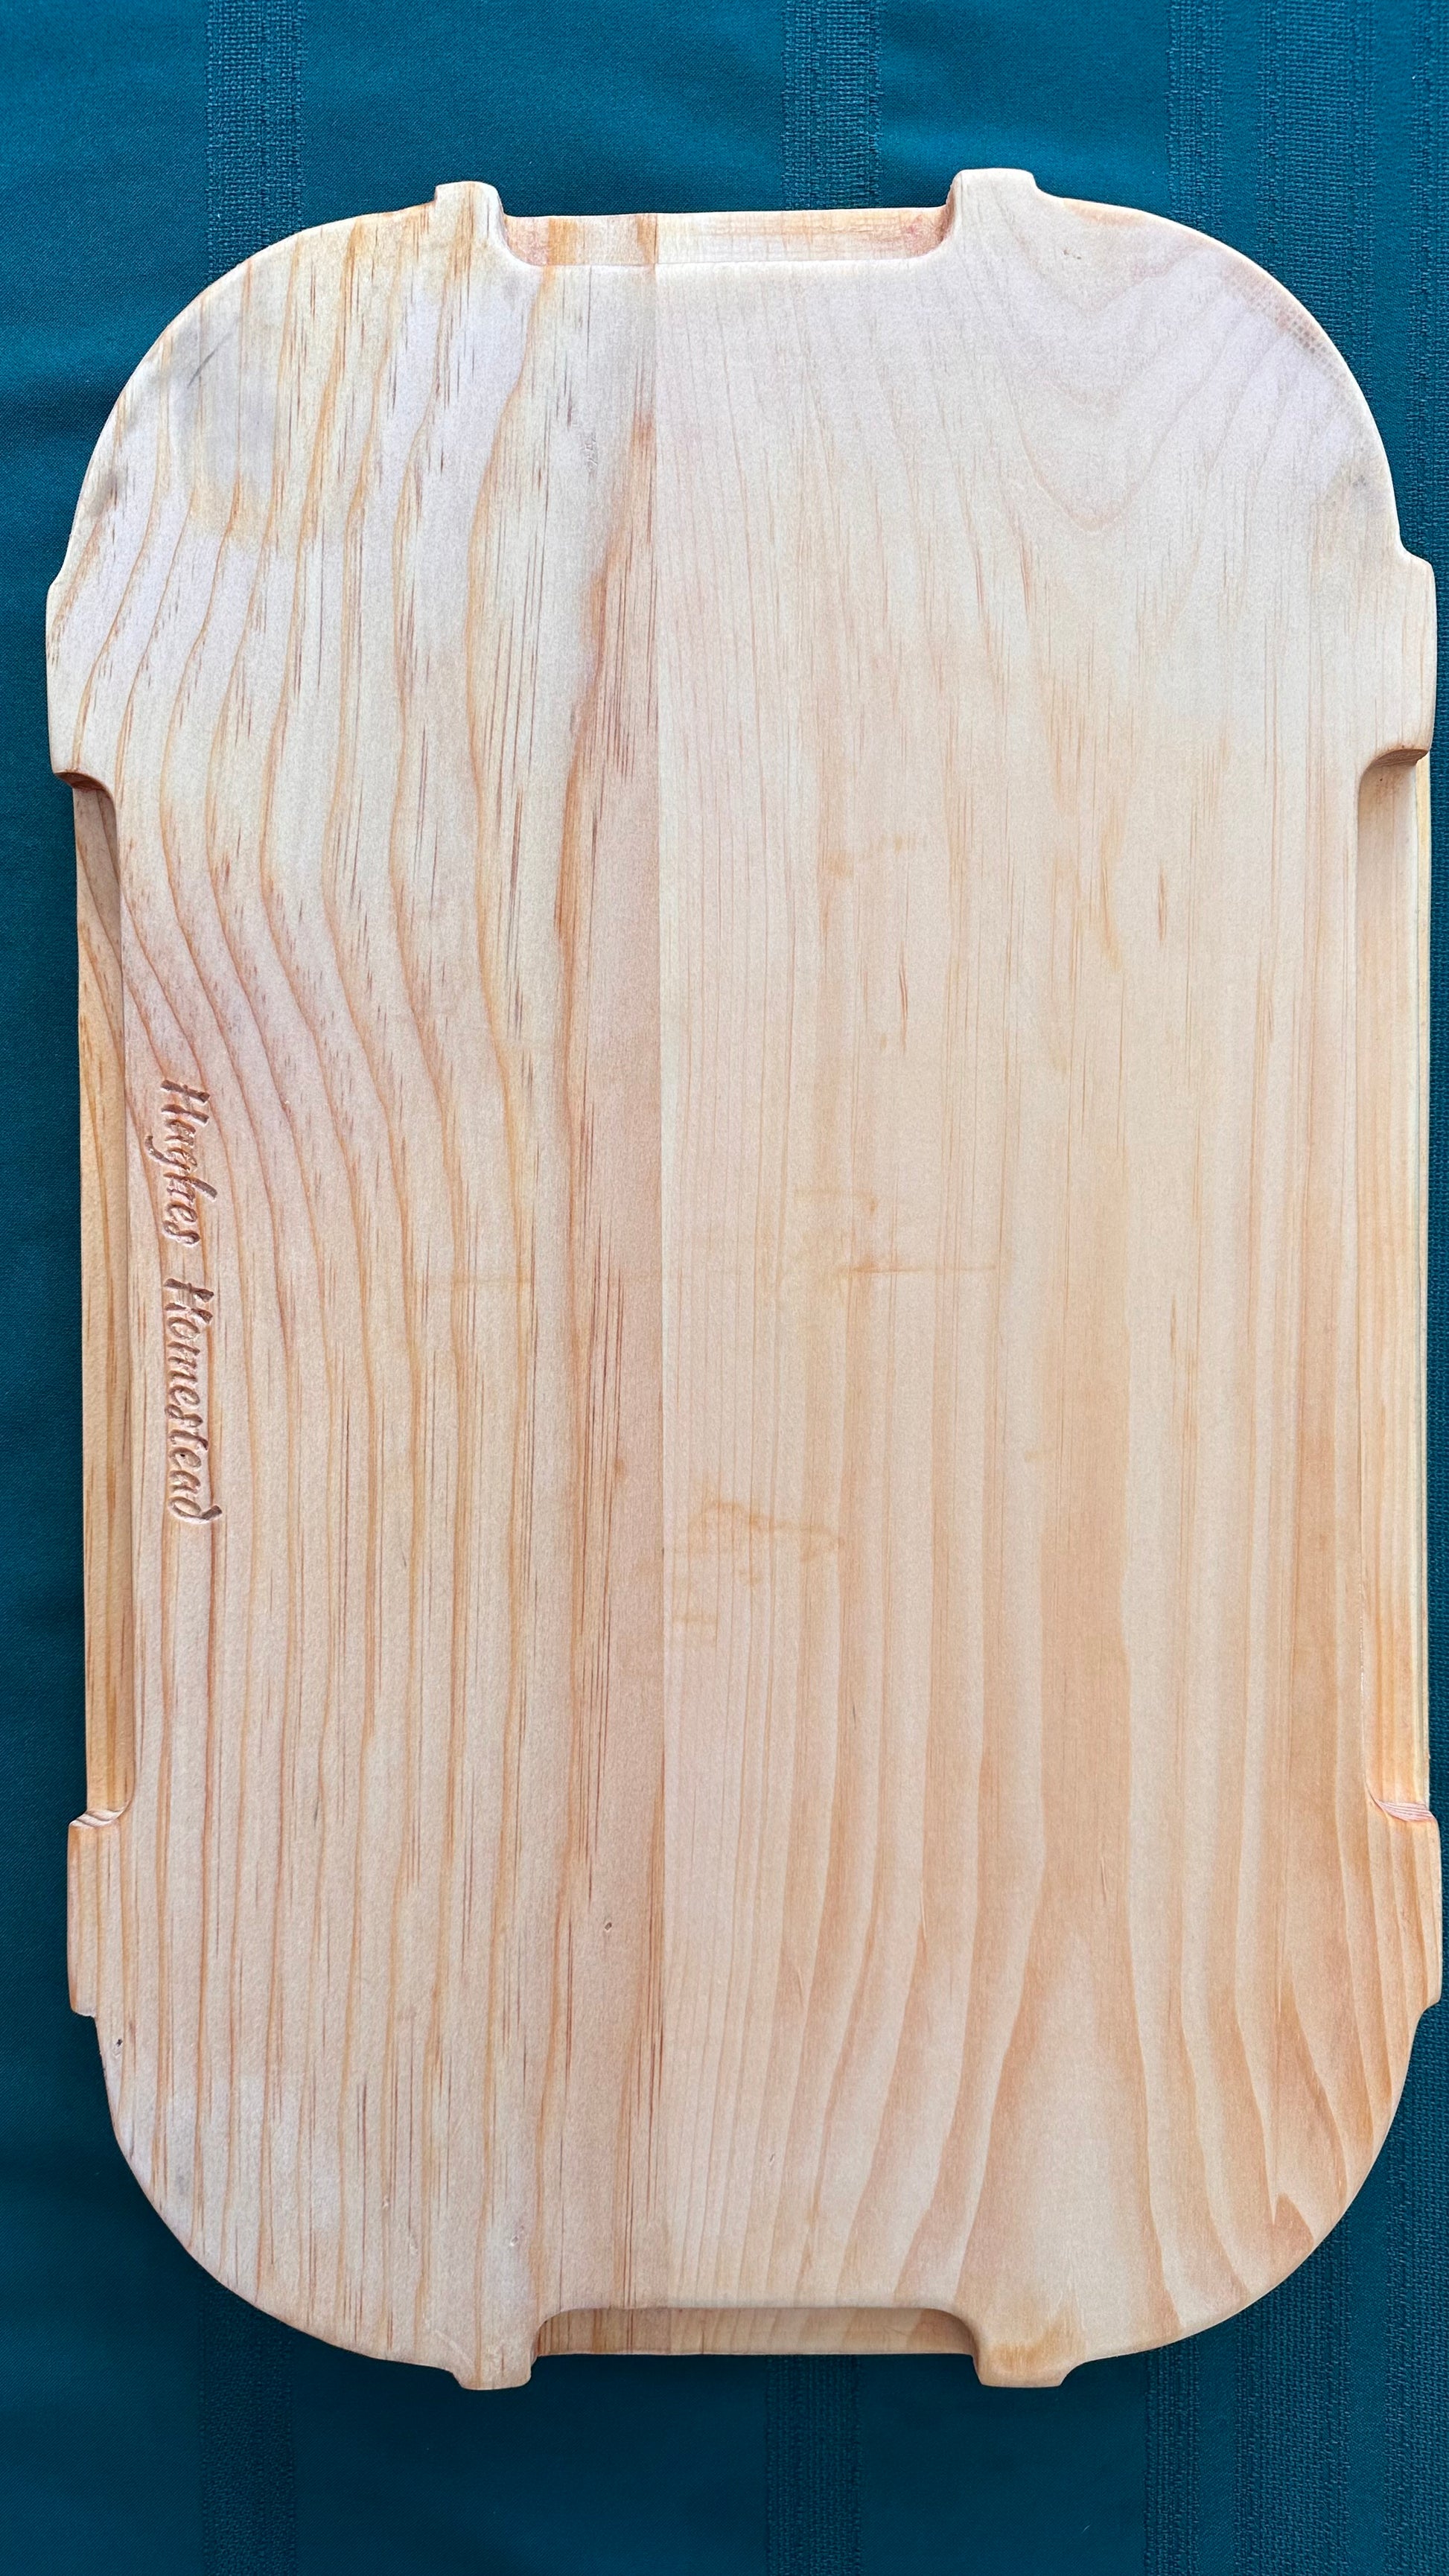 The back of the board displaying the handles on every side.